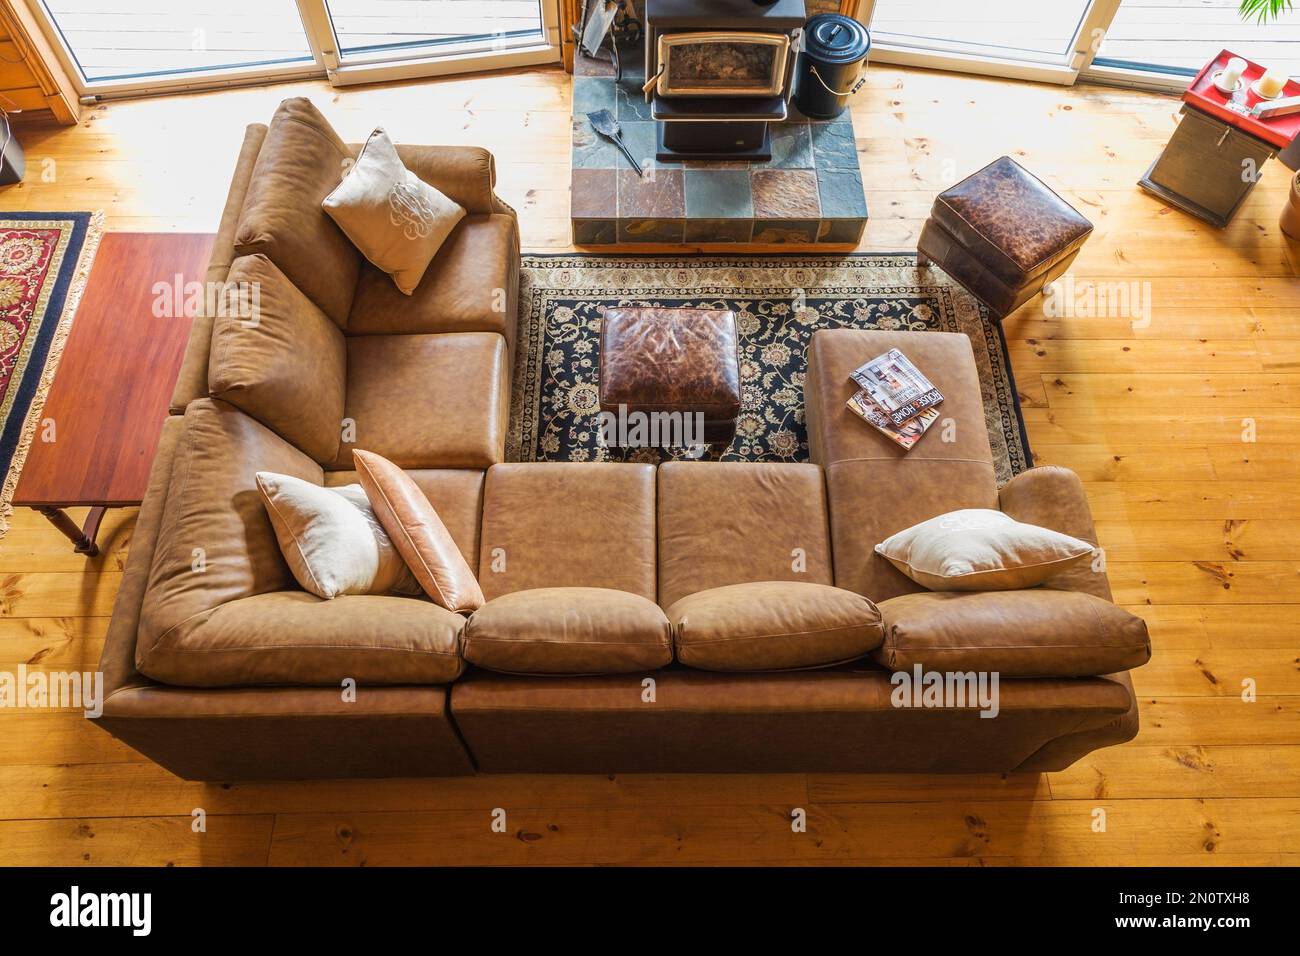 Top view of tan leather sectional sofa with wood burning stove on elevated natural stone base in living room area of great room in log cabin. Stock Photo